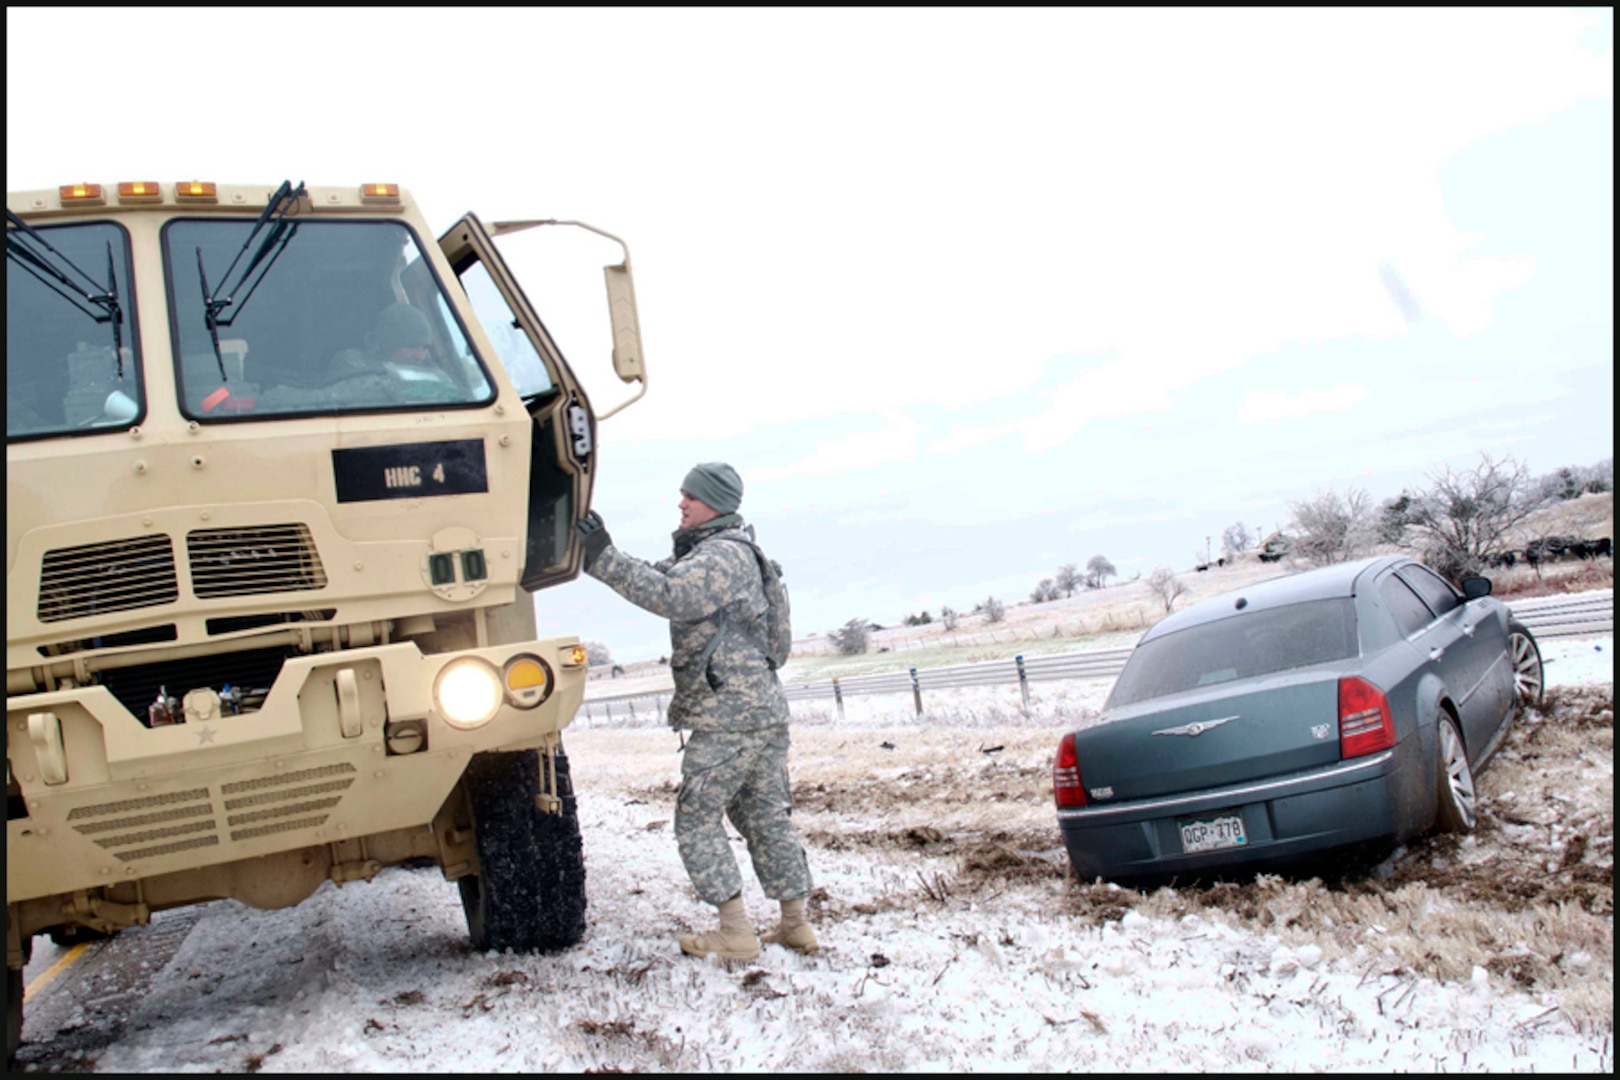 An Oklahoma Army National Guardsman prepares to check a vehicle for occupants, Dec. 28, 2015. (Oklahoma National Guard photo by Sgt. Anthony Jones)